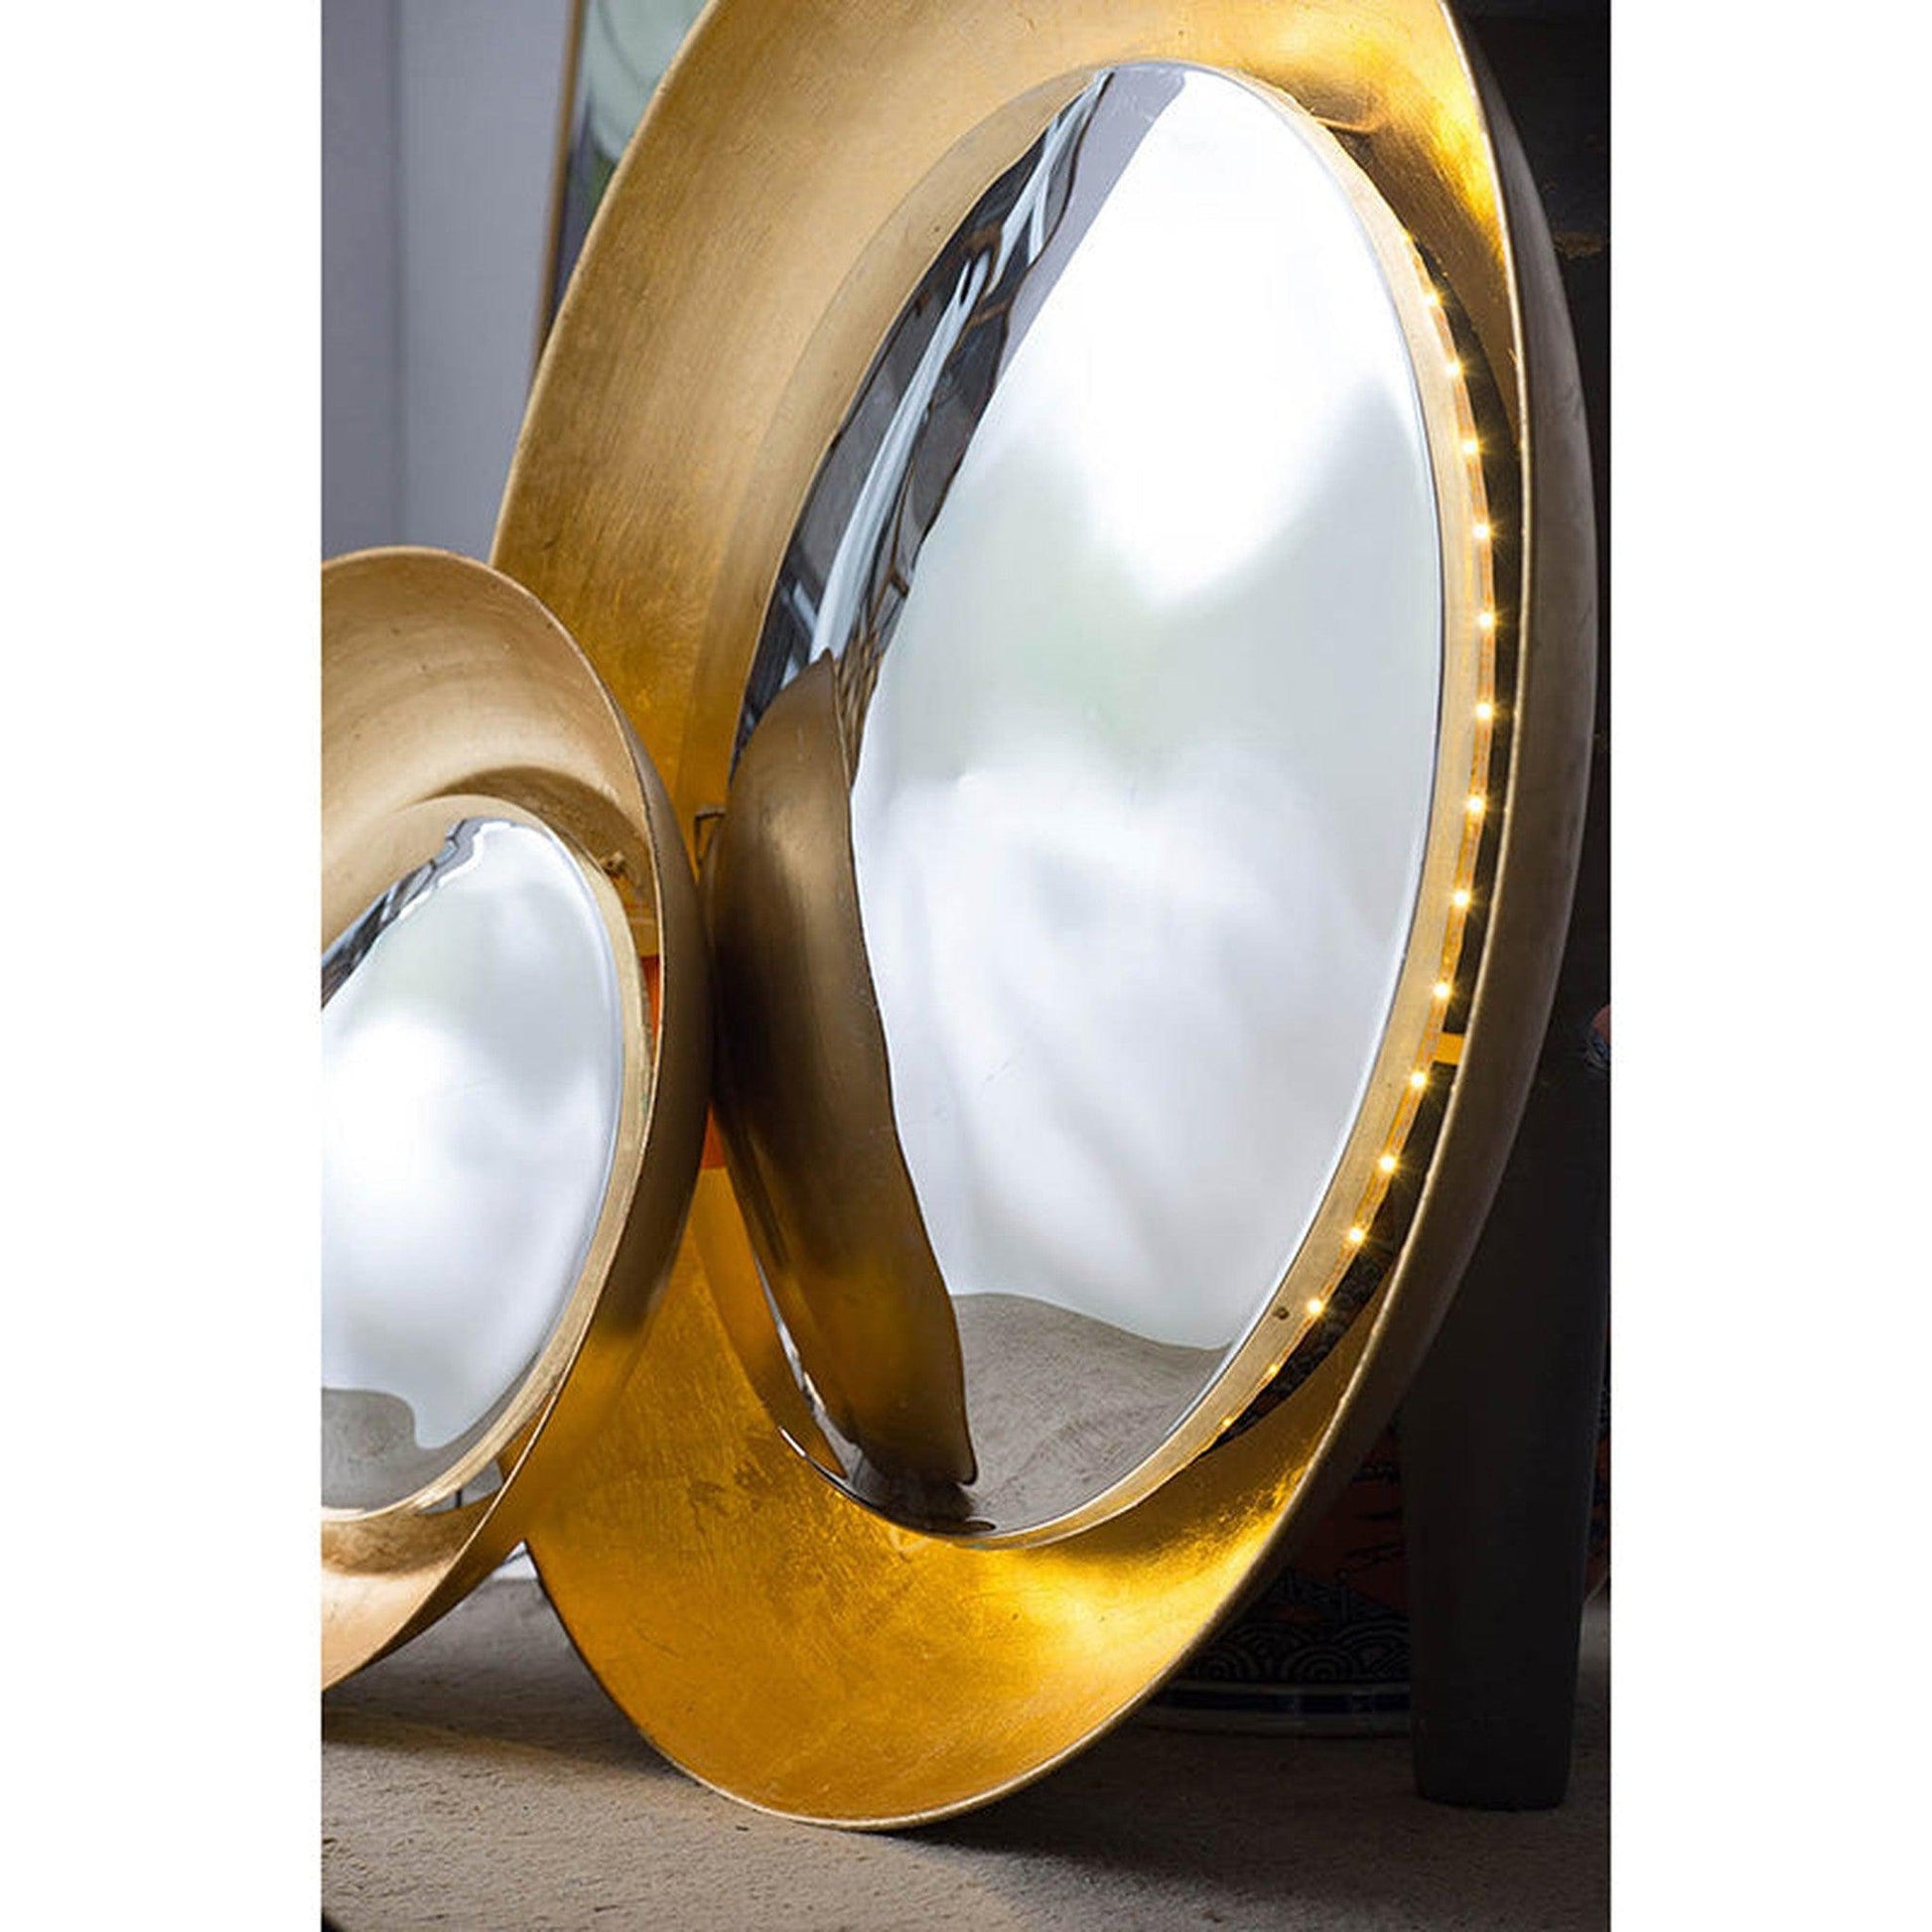 A&B Home 31" x 31" Bundle of 8 Round Lustrous Gold Metal Framed Wall-Mounted Mirror With Led Lighting